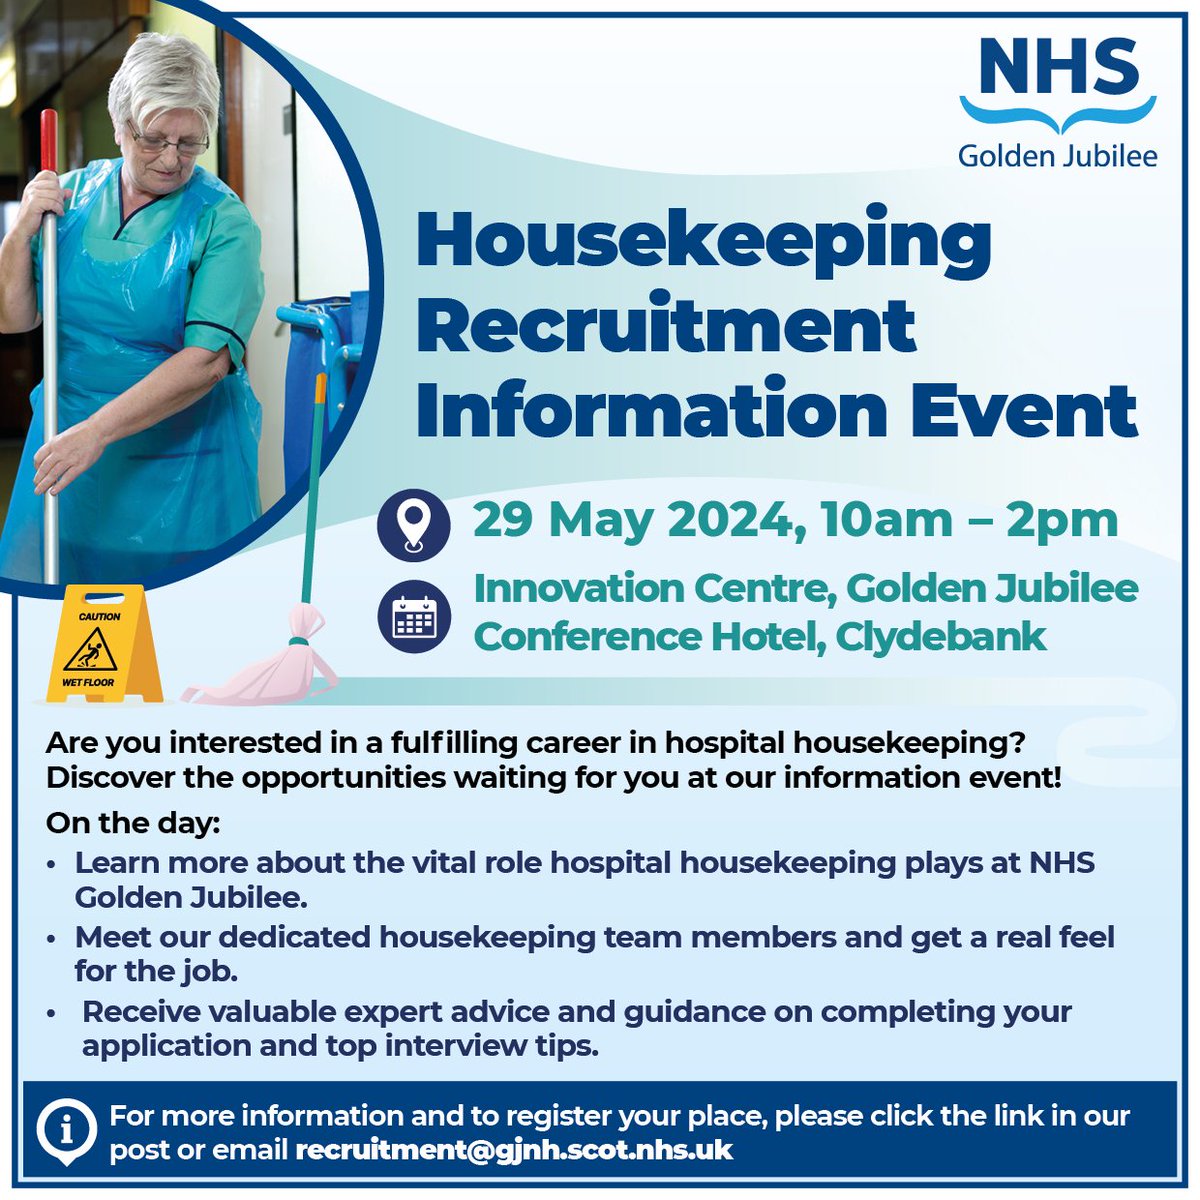 Calling all those interested in housekeeping roles📣 We are hosting a Housekeeping Recruitment Event on Wednesday 29 May, from 10am - 2pm at the Golden Jubilee Conference Hotel To register, please visit apply.jobs.scot.nhs.uk/Job/JobDetail?…